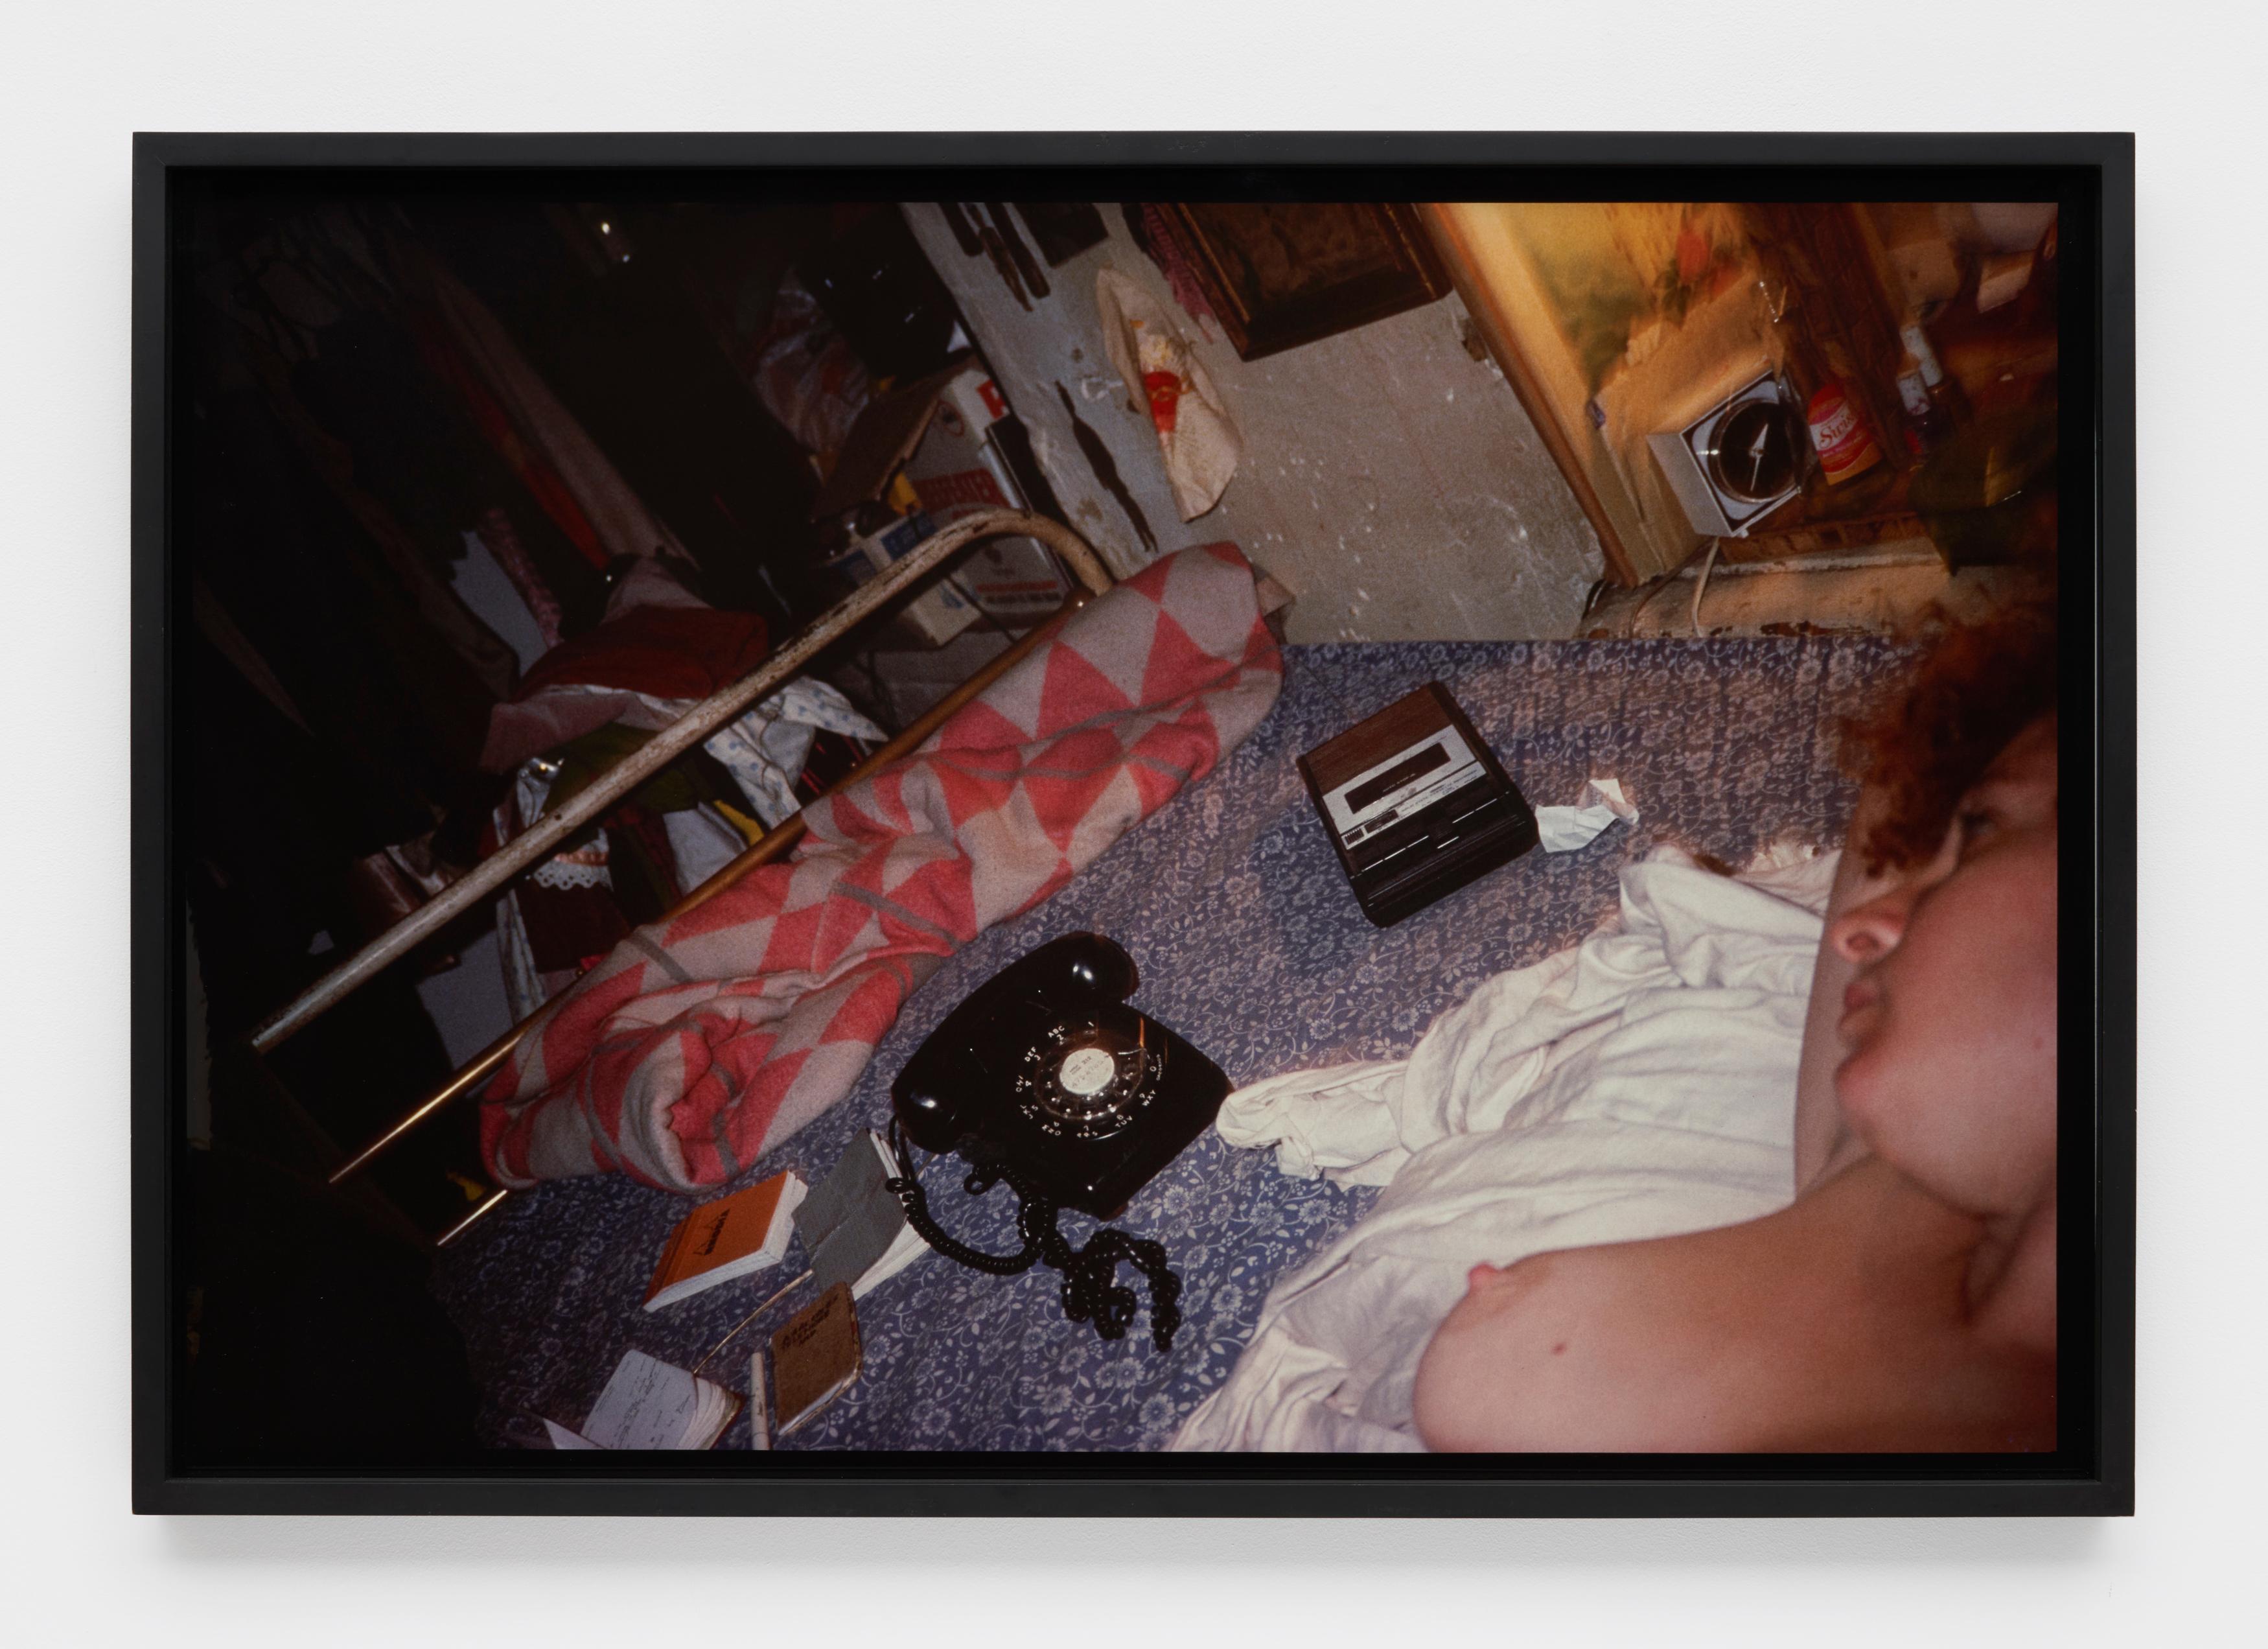 Self-portrait in bed, NYC - Photograph by Nan Goldin